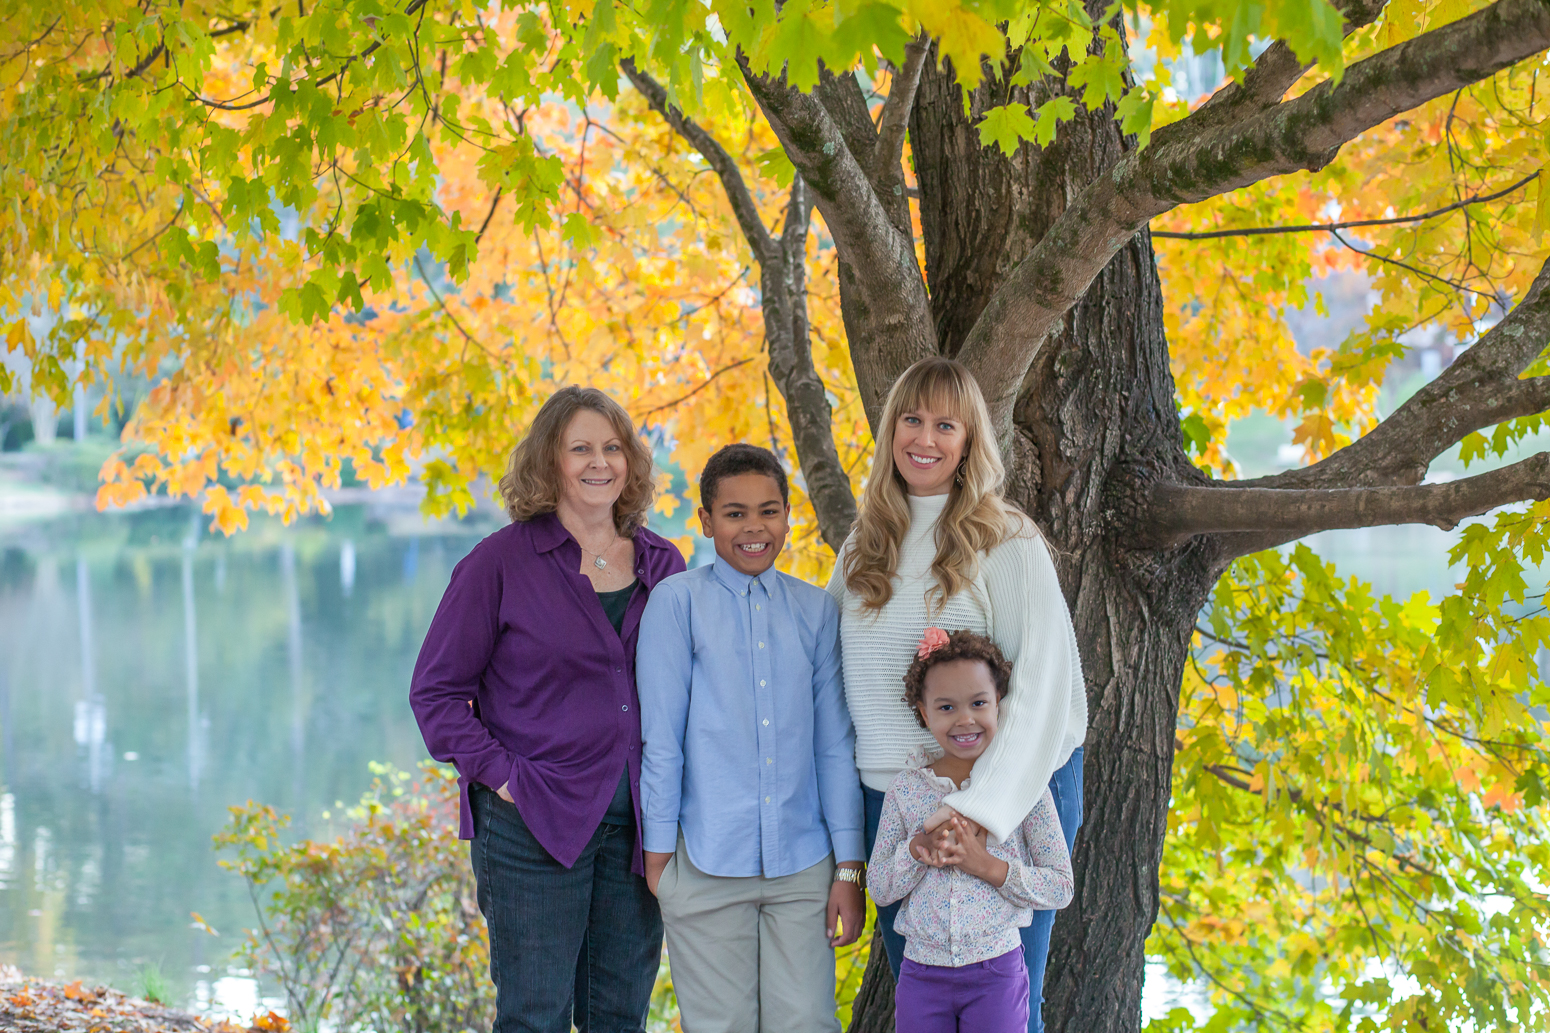 outdoor fall family portrait